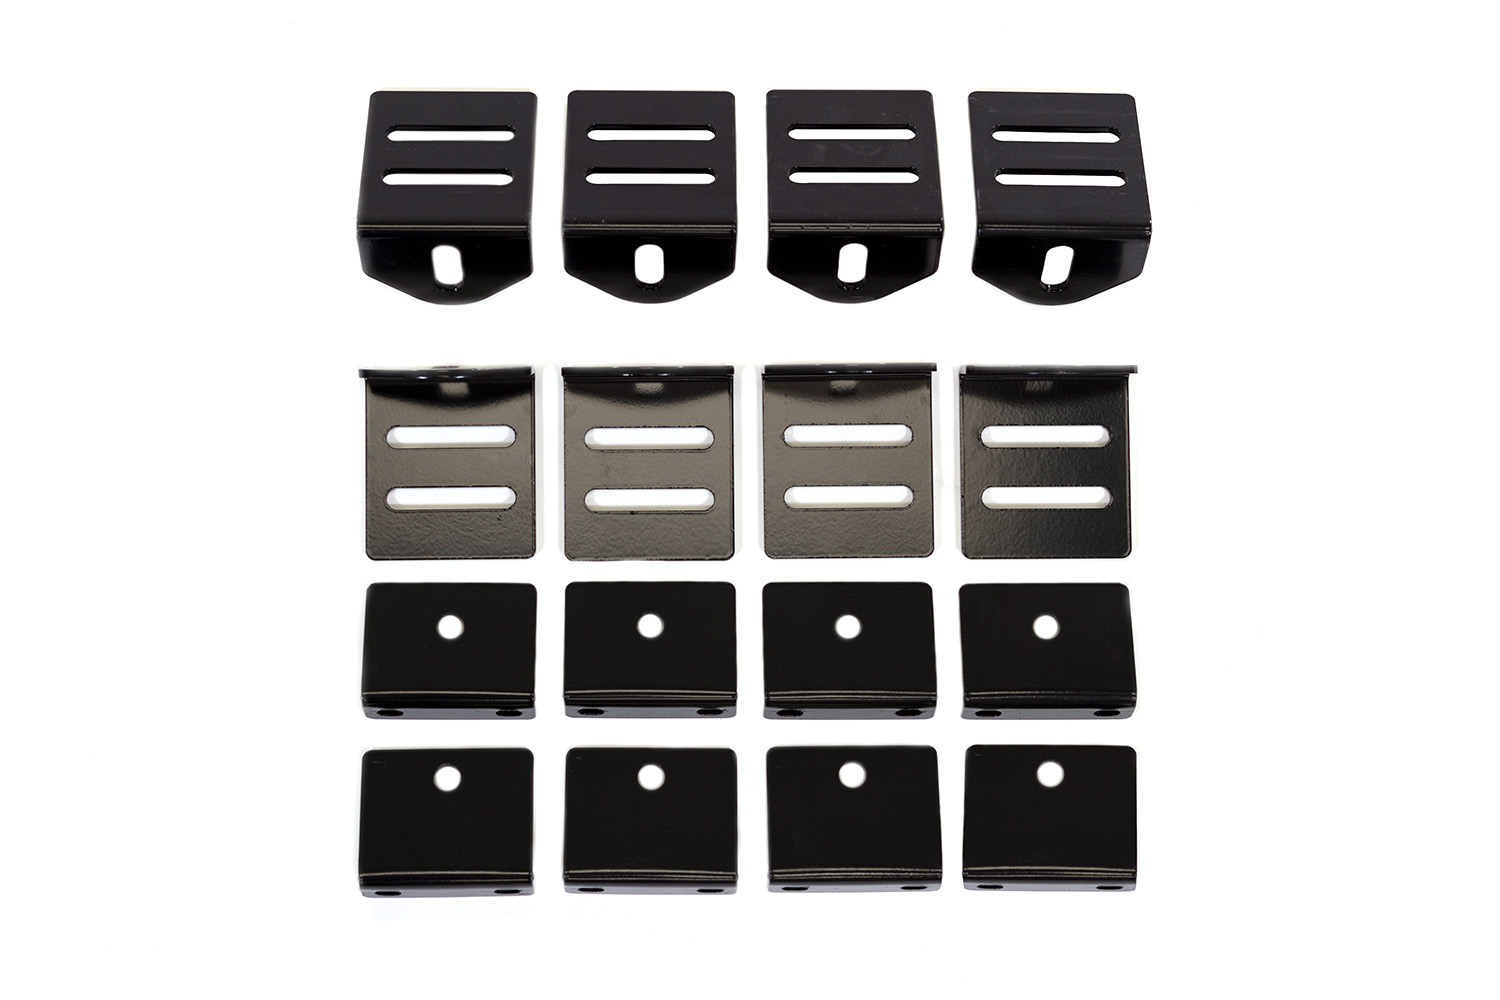 Roof Rack Mounting Feet Kit Suited For Toyota 200 Series Land Cruiser / Lexus LX570 Questions & Answers